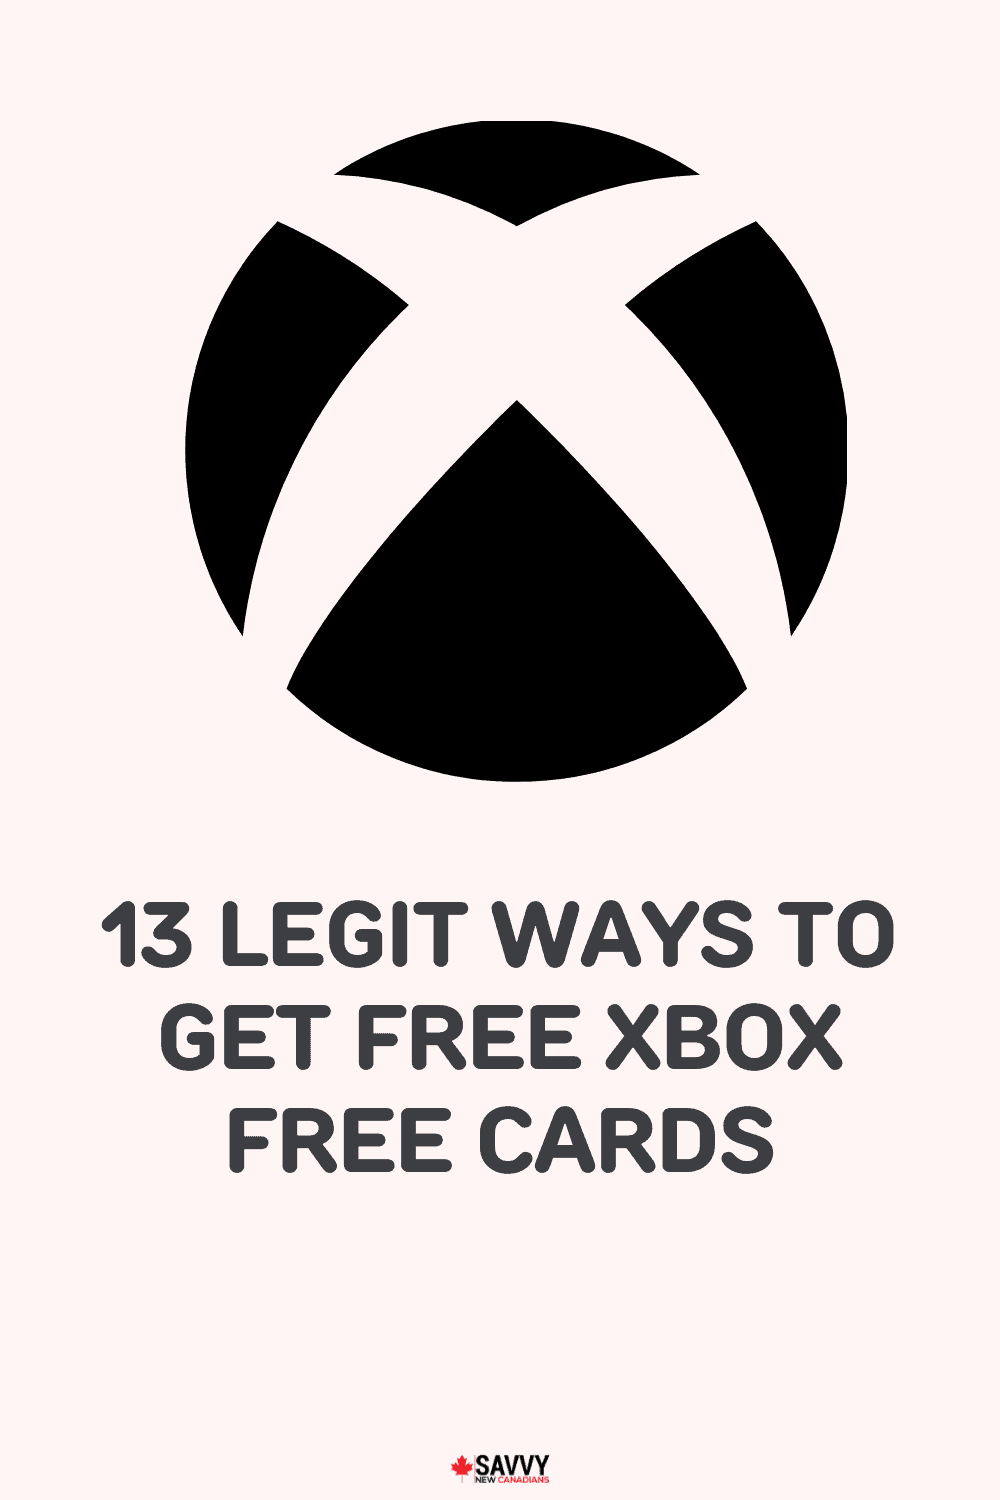 13 Legit Ways To Get Free Xbox Gift Cards and Codes in 2022